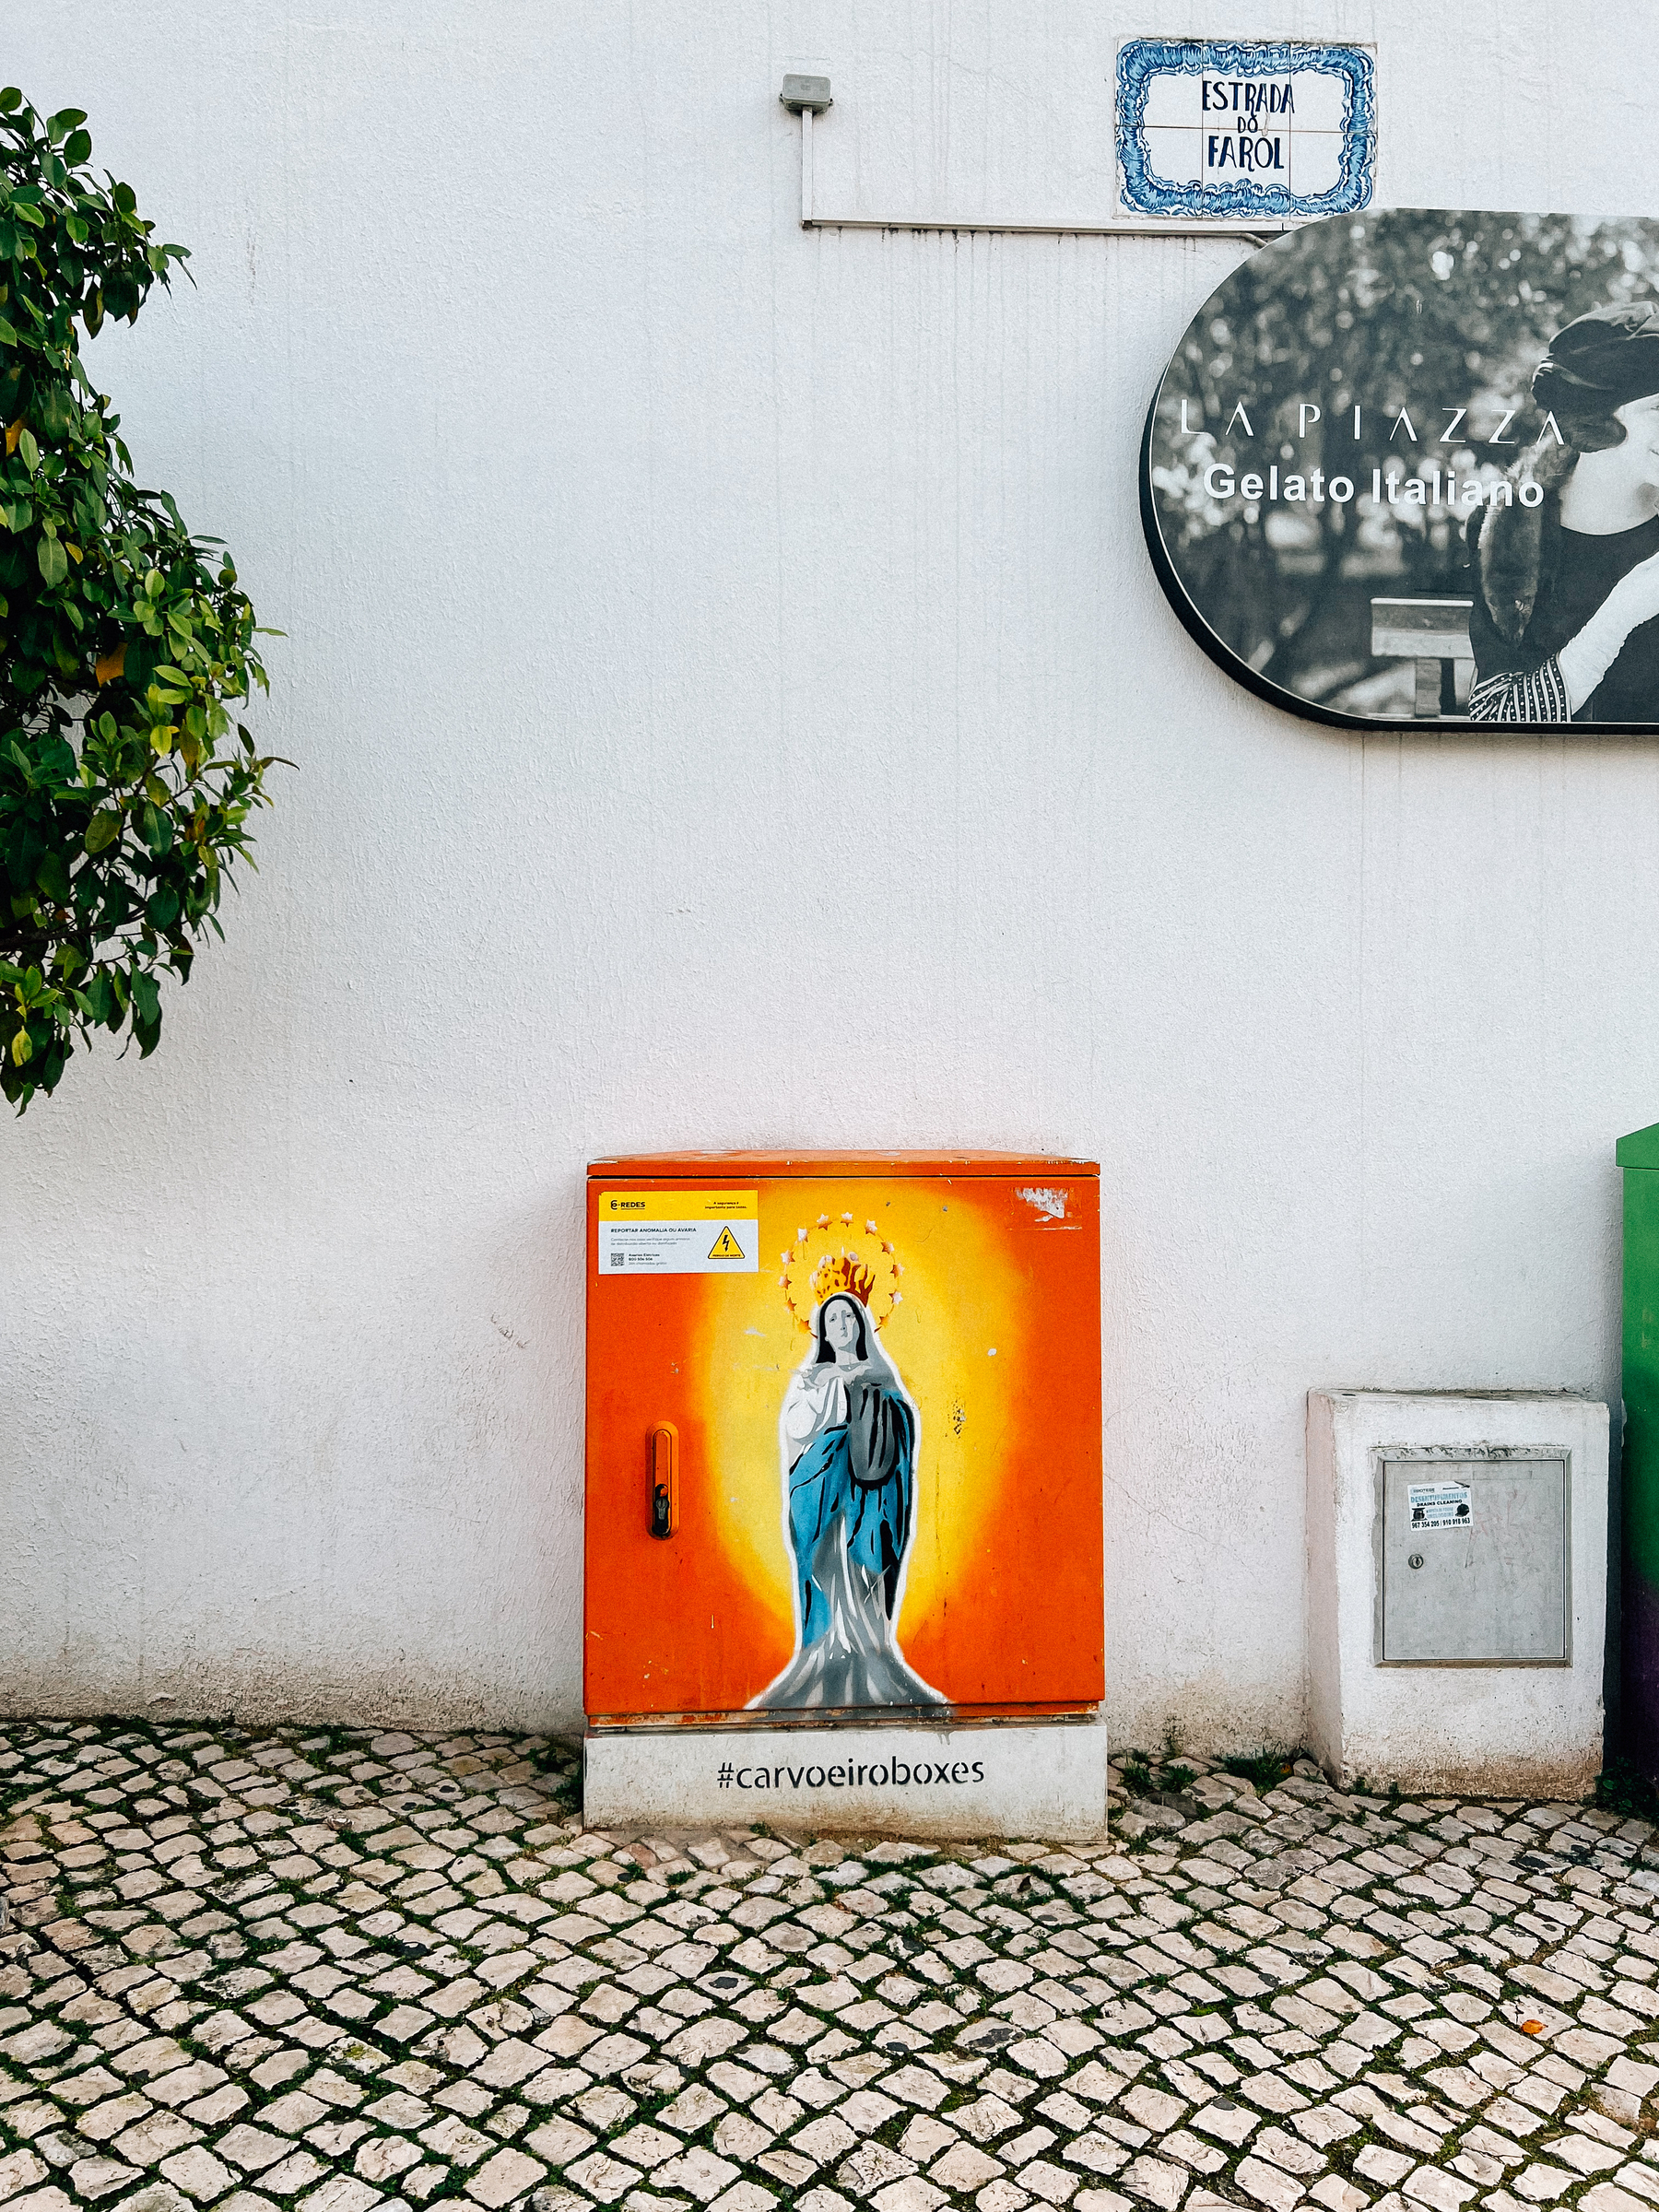 An electrical utility box on a street with a colorful depiction of the Virgin Mary, hashtag #carvoeiroboxes at the bottom, adjacent to a traditional cobblestone pavement and white walls.